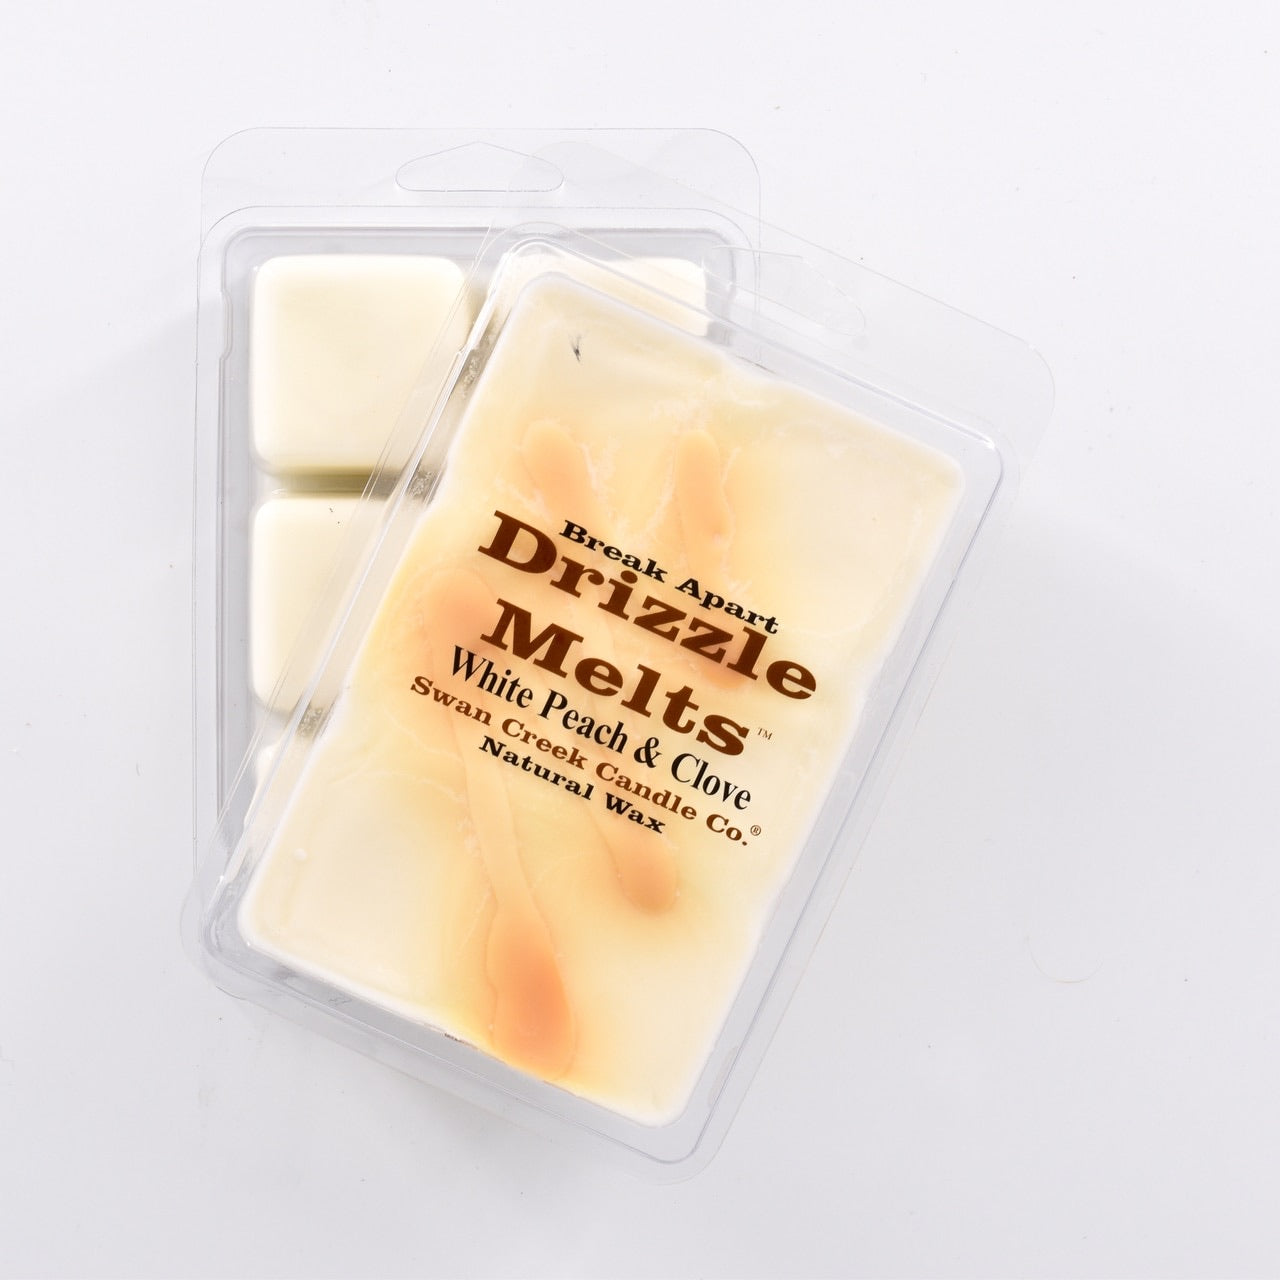 cream colored wax with caramel colored swirl across the top in packaging with another package showing the bottom of the wax melts break apart design.